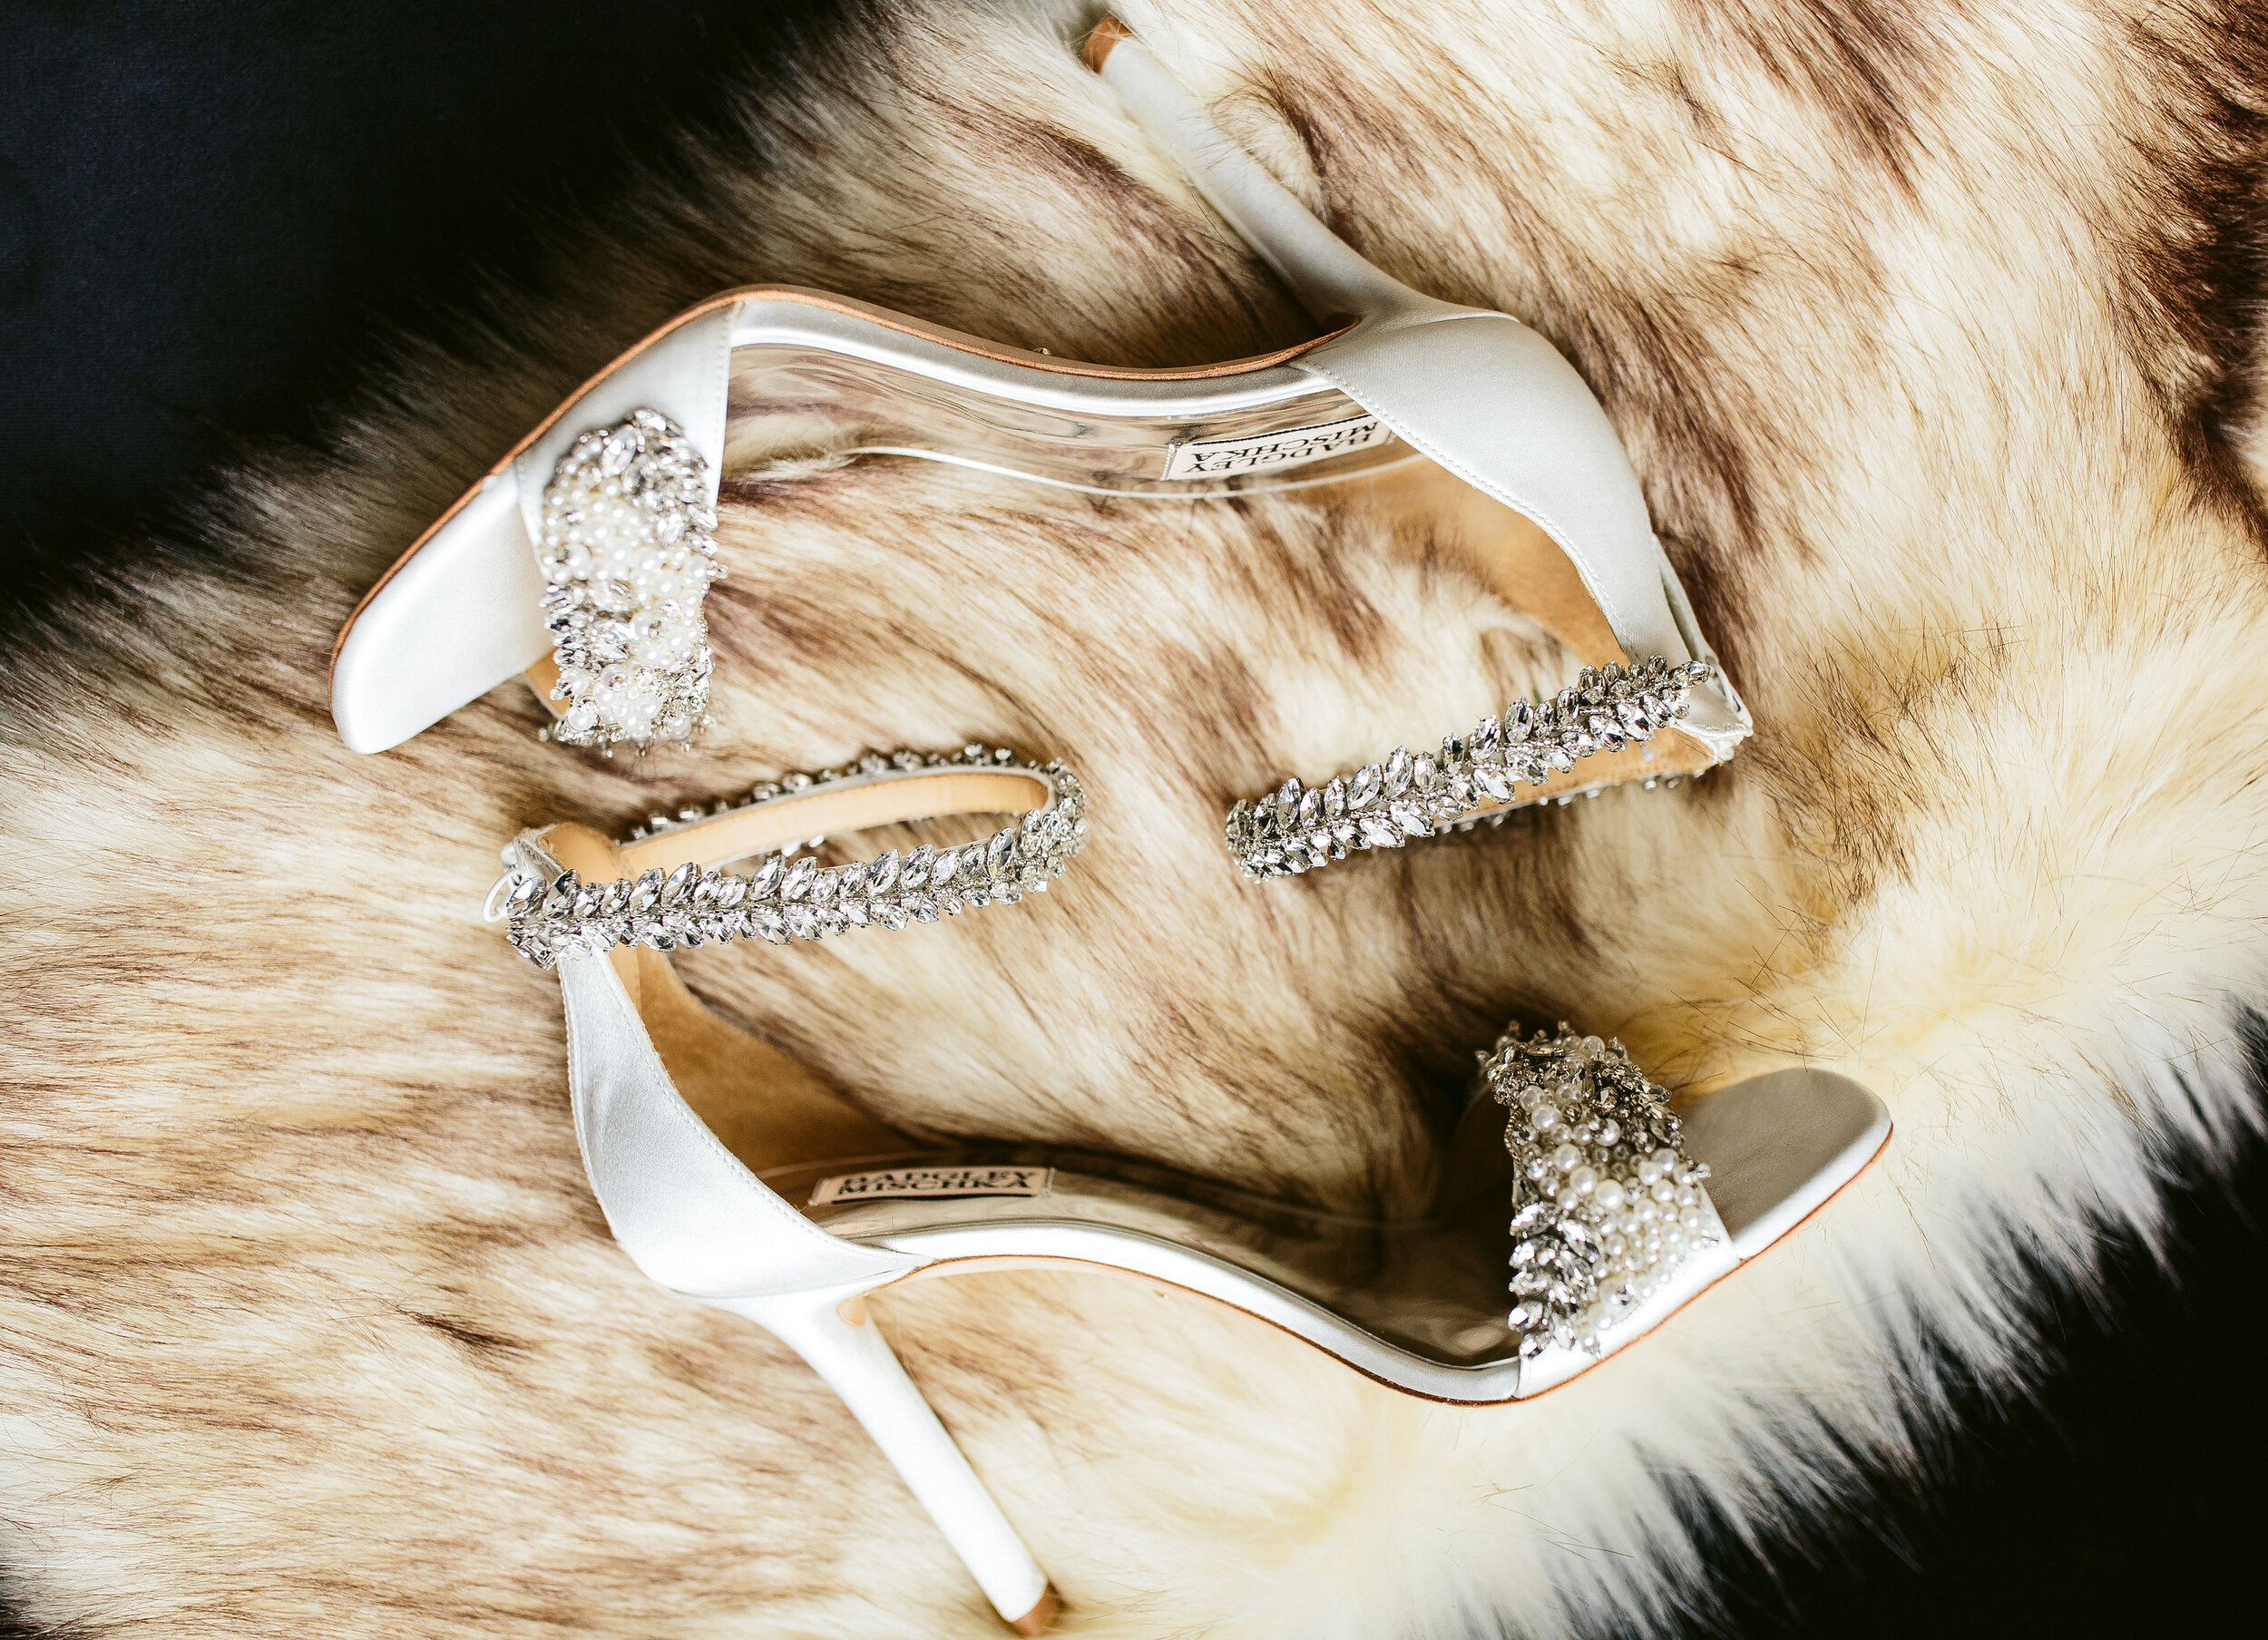 Embellished wedding shoes: Luxury Winter Wonderland Wedding at Company 251 featured on CHI thee WED